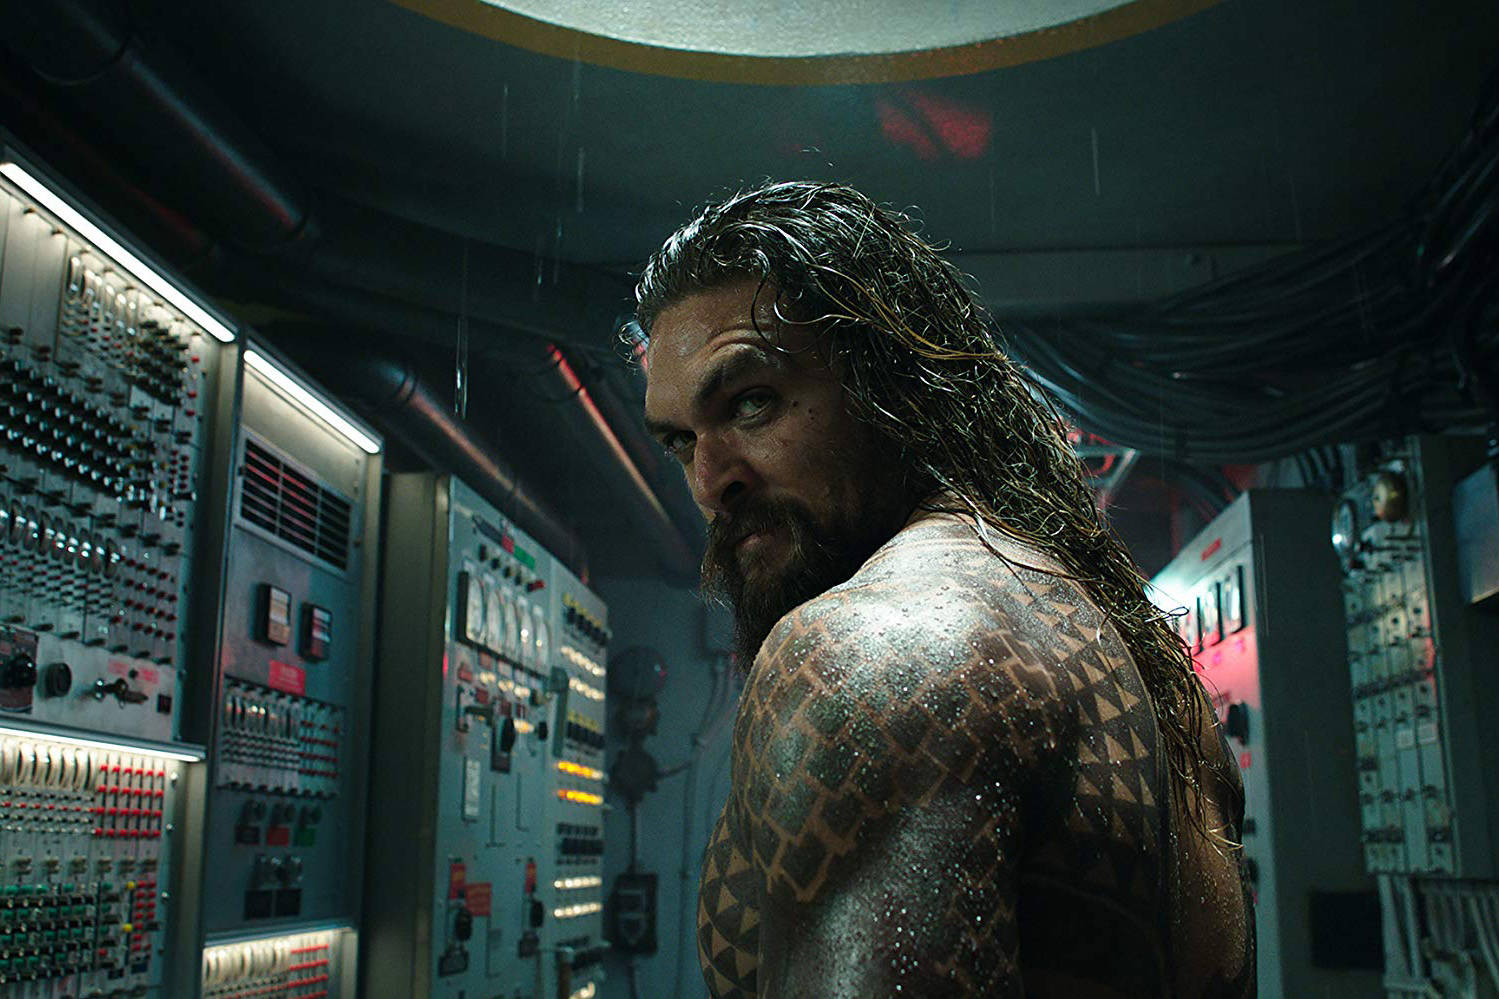 Now Playing: ‘Aquaman’ a sea adventure that heads DC in the right direction